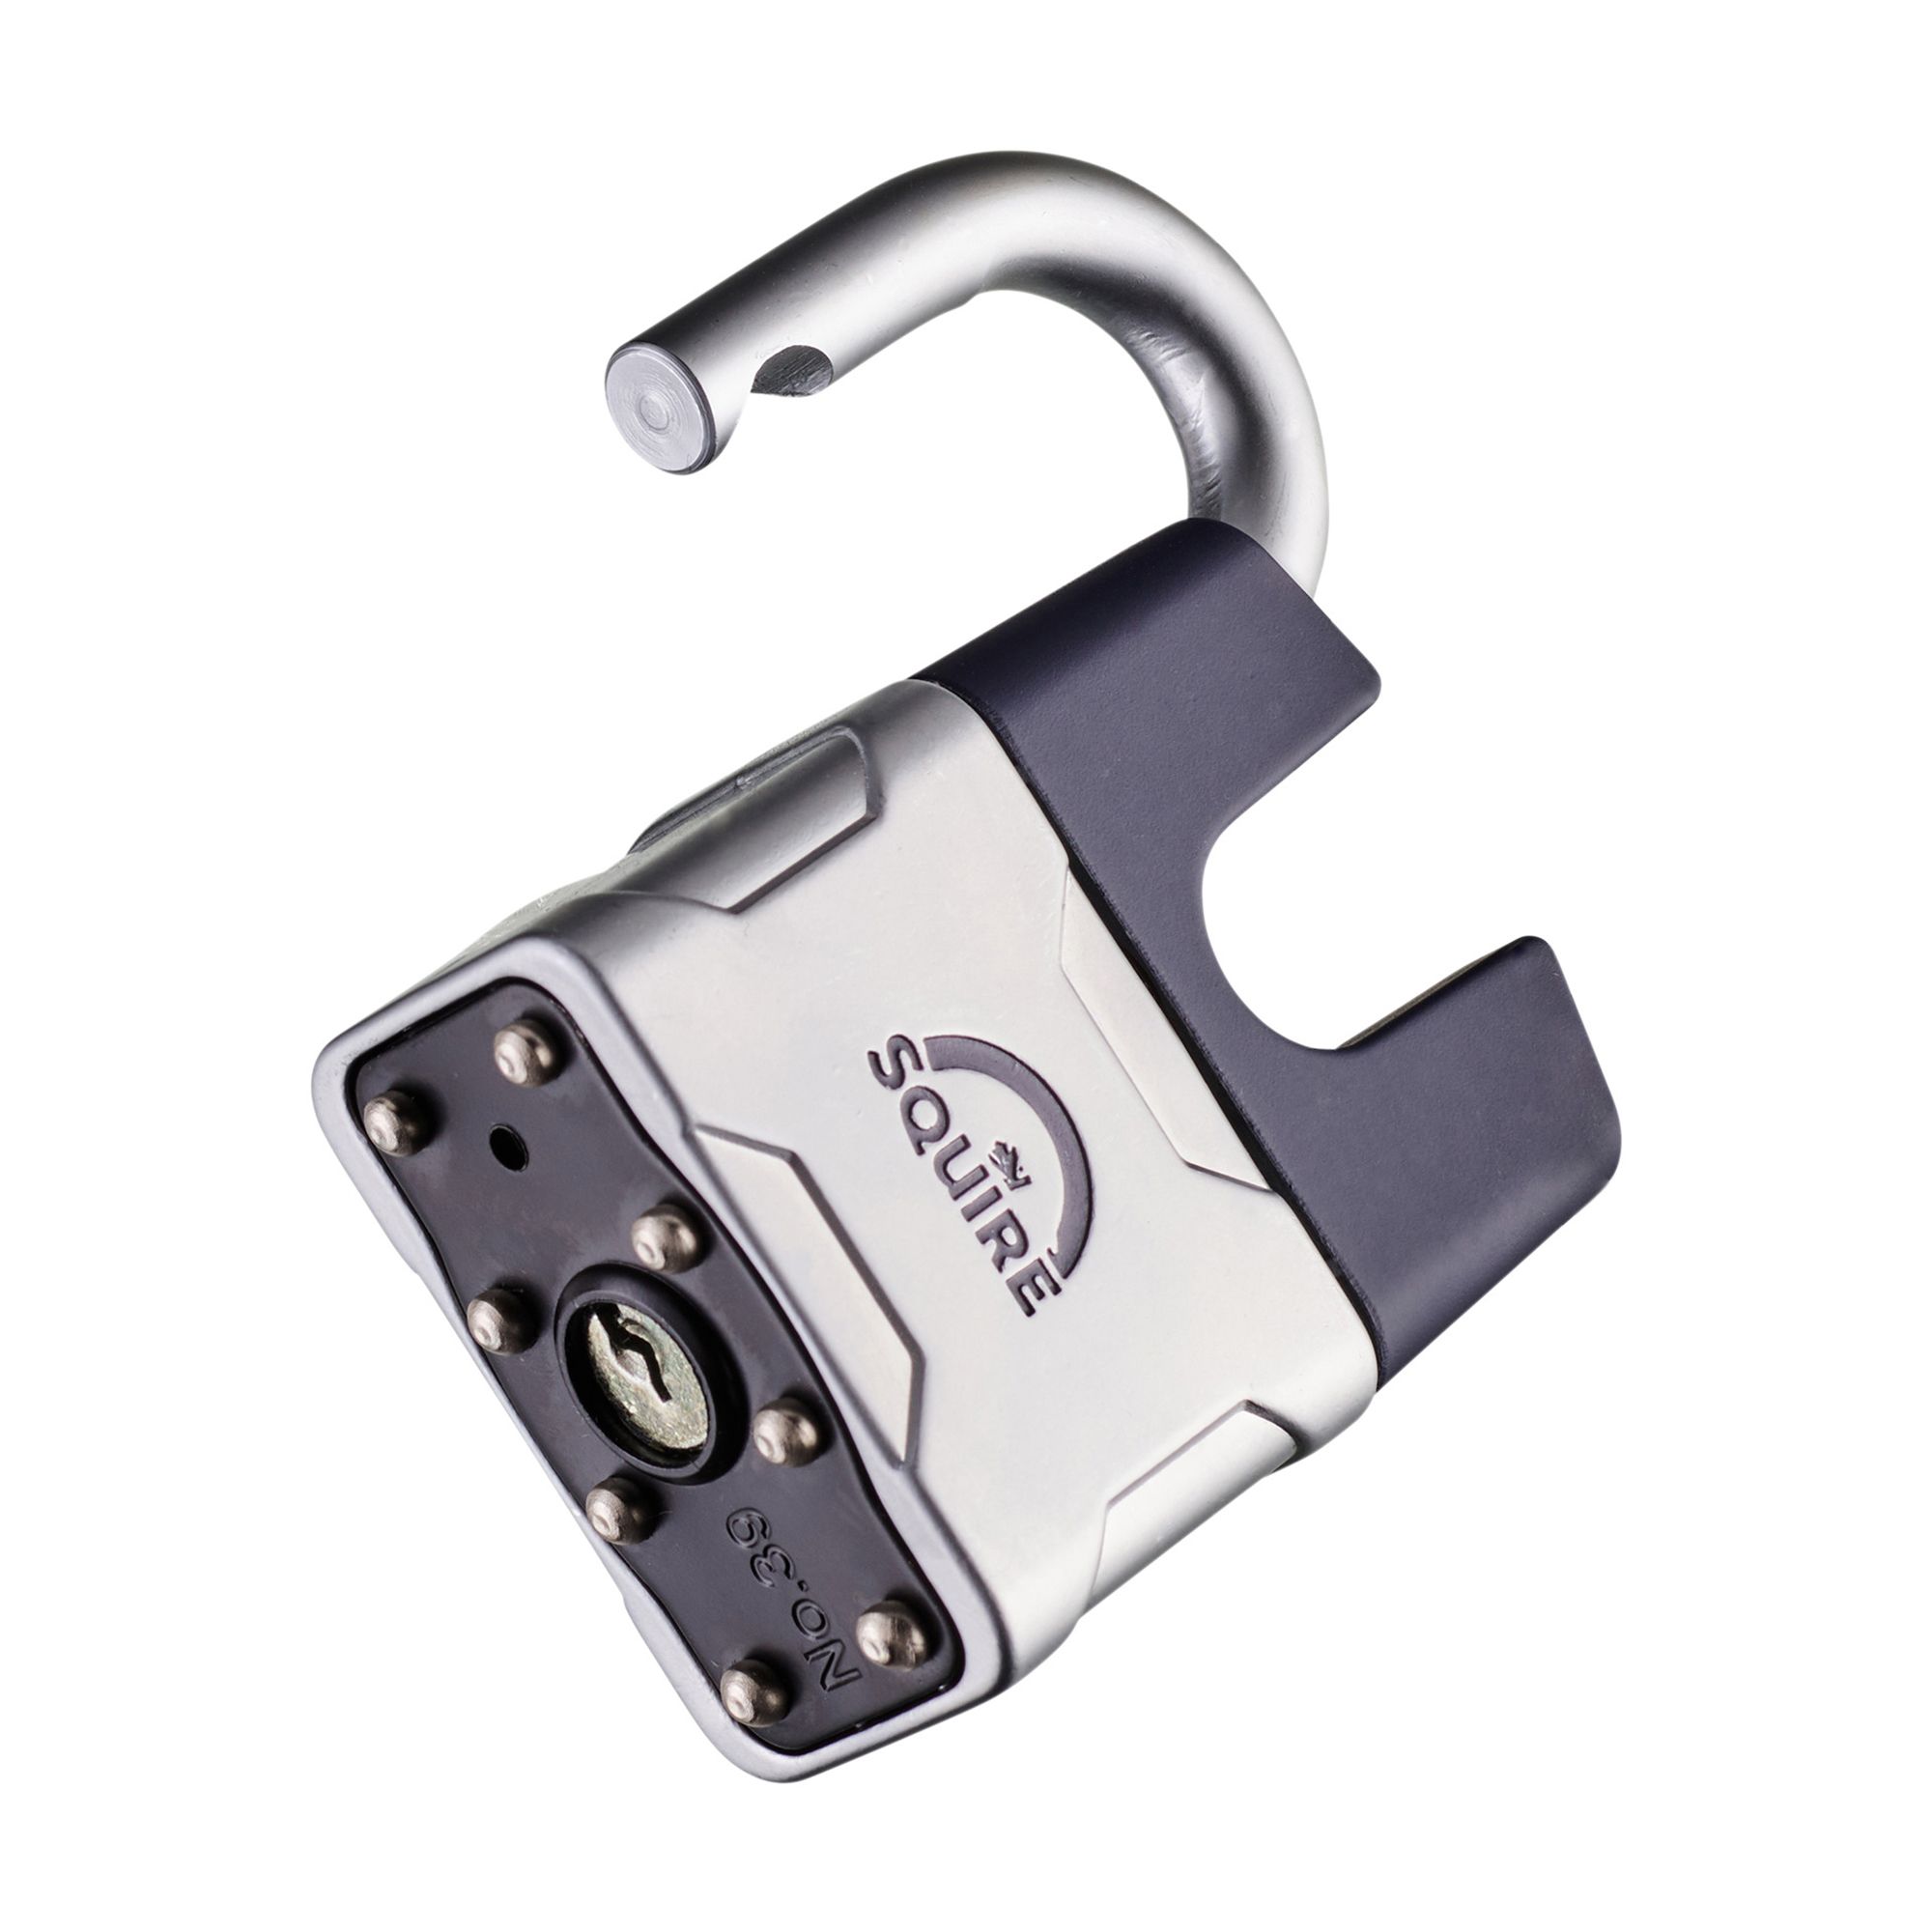 Squire Closed shackle Padlock (W)55mm